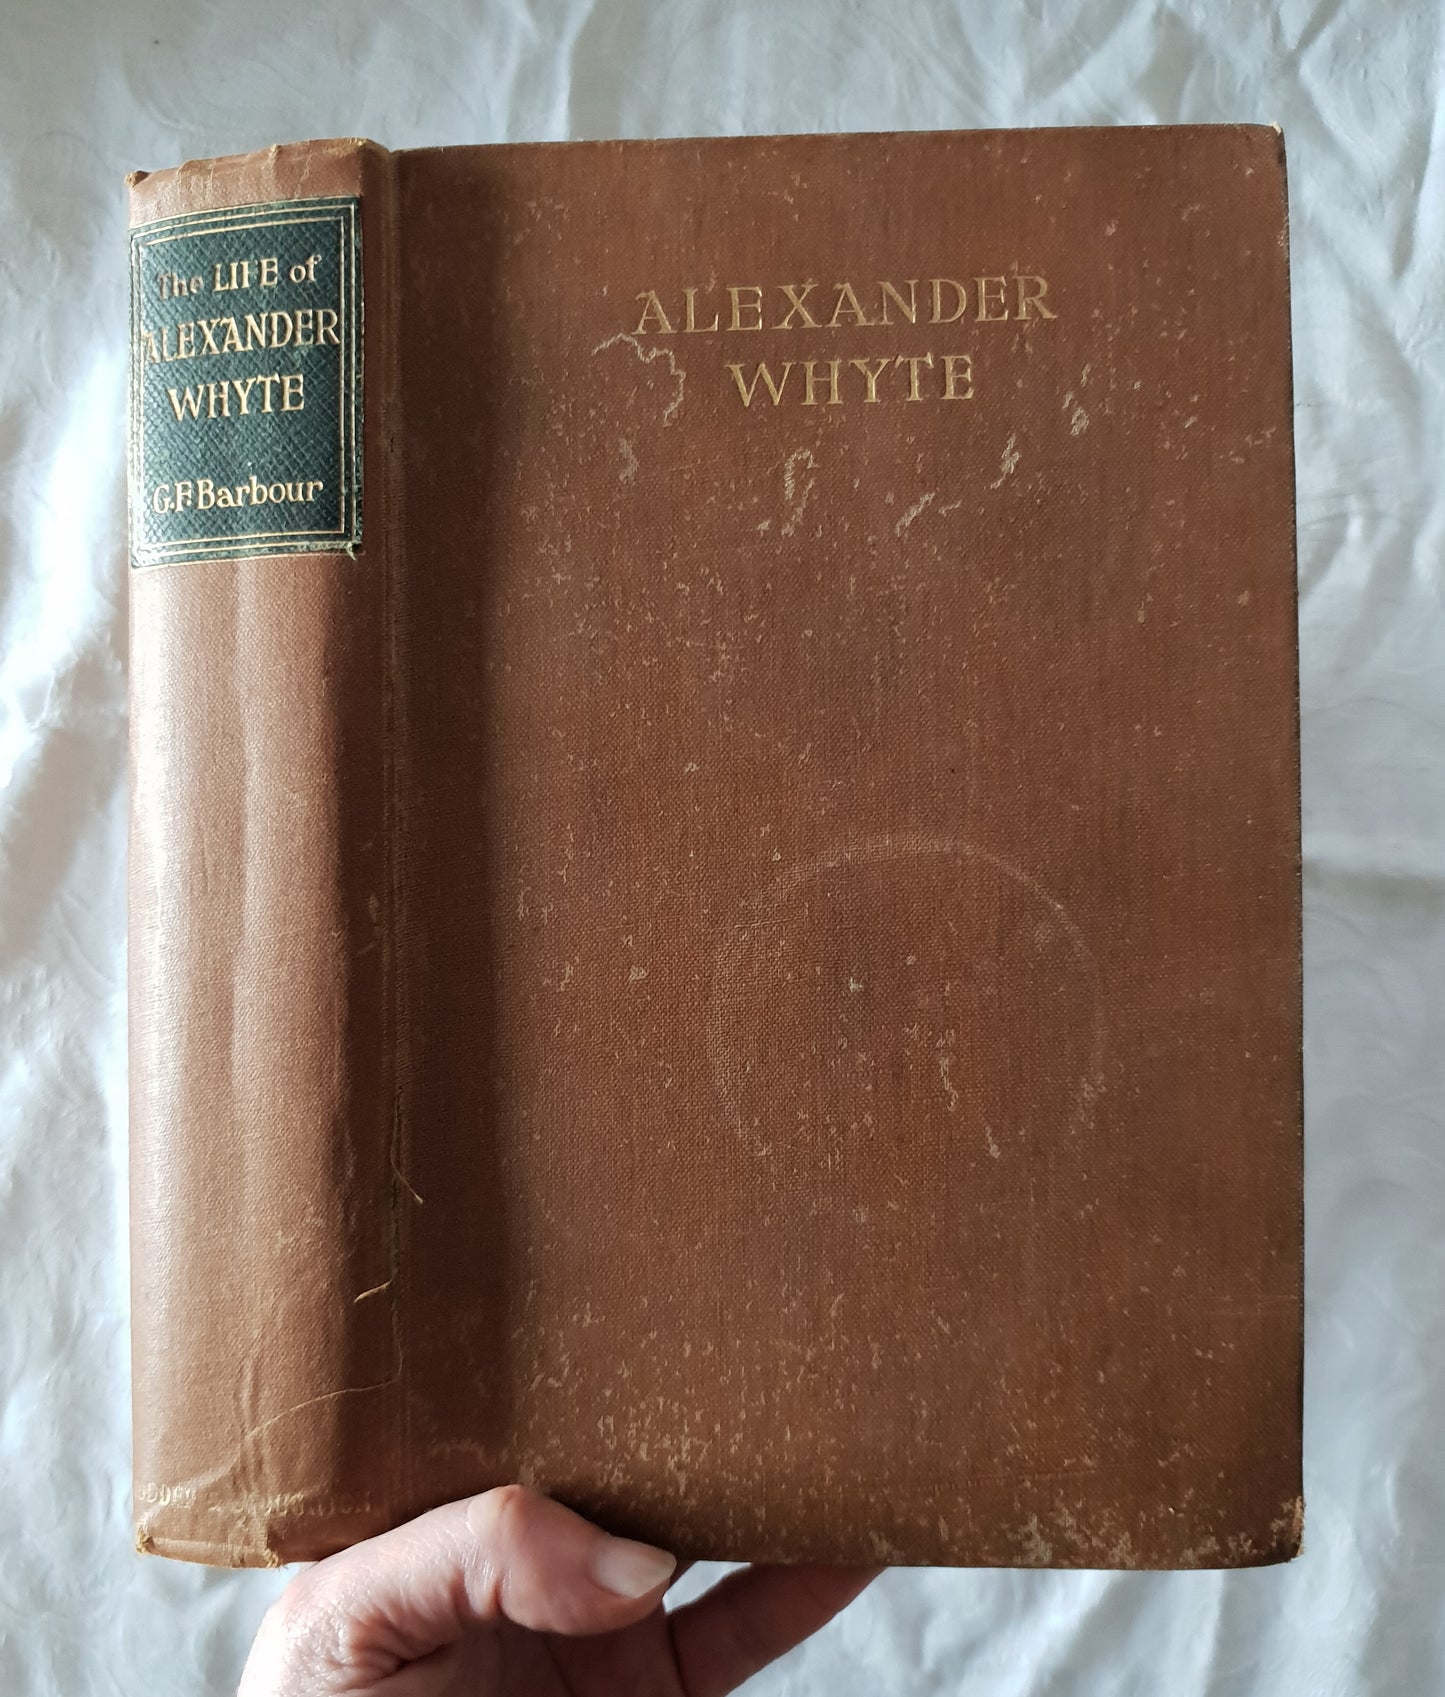 The Life of Alexander Whyte by G. F. Barbour